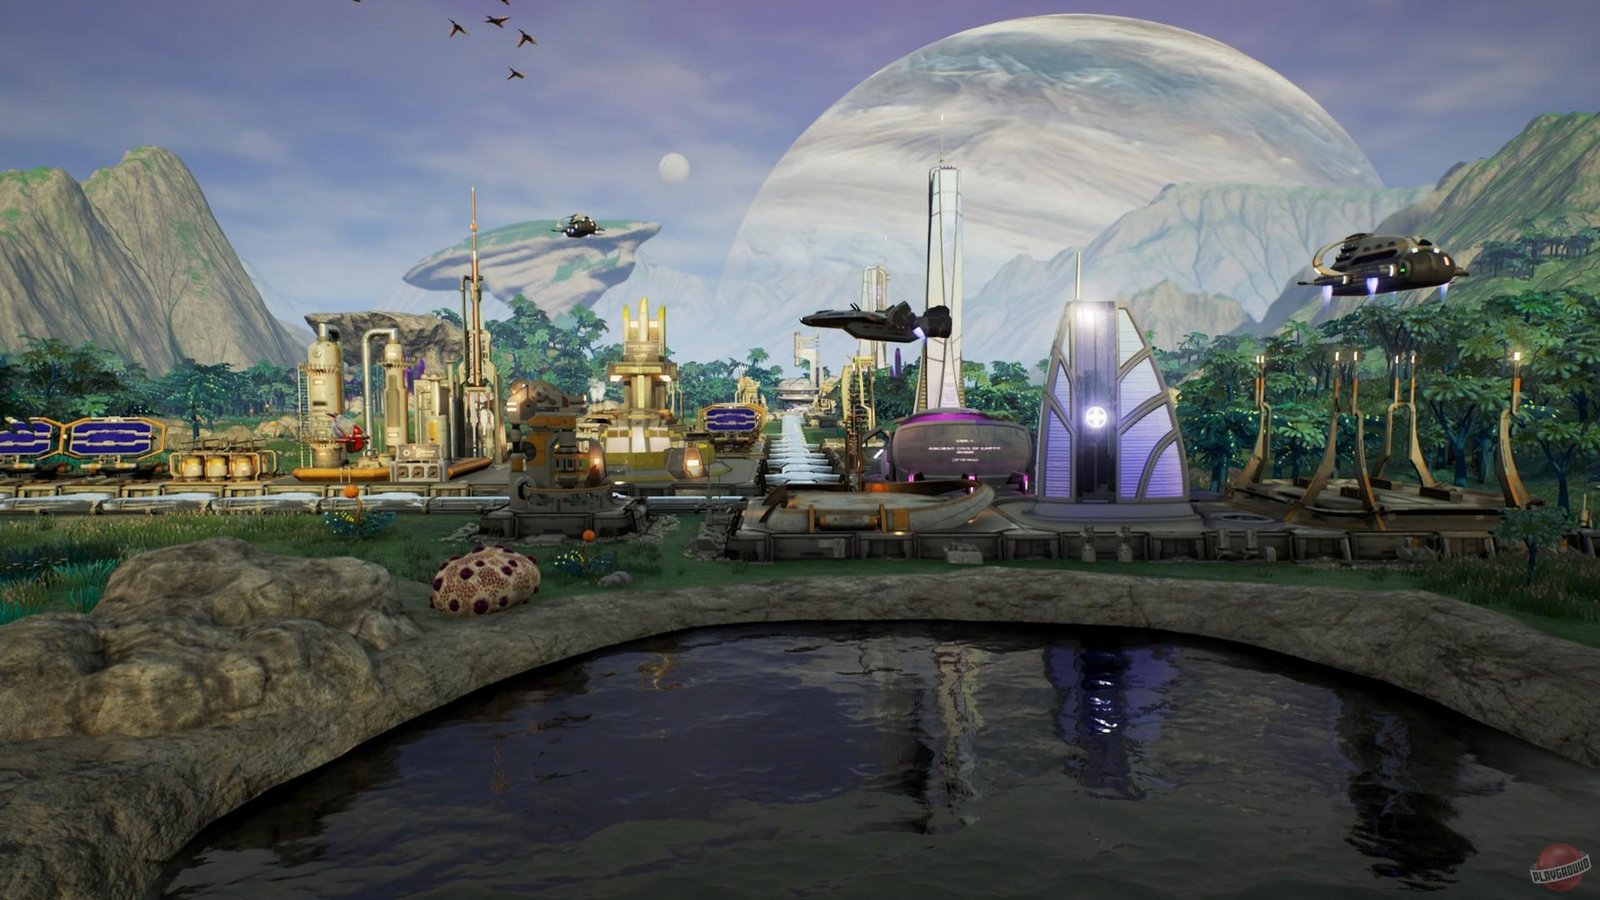 Aven Colony - Cerulean Vale